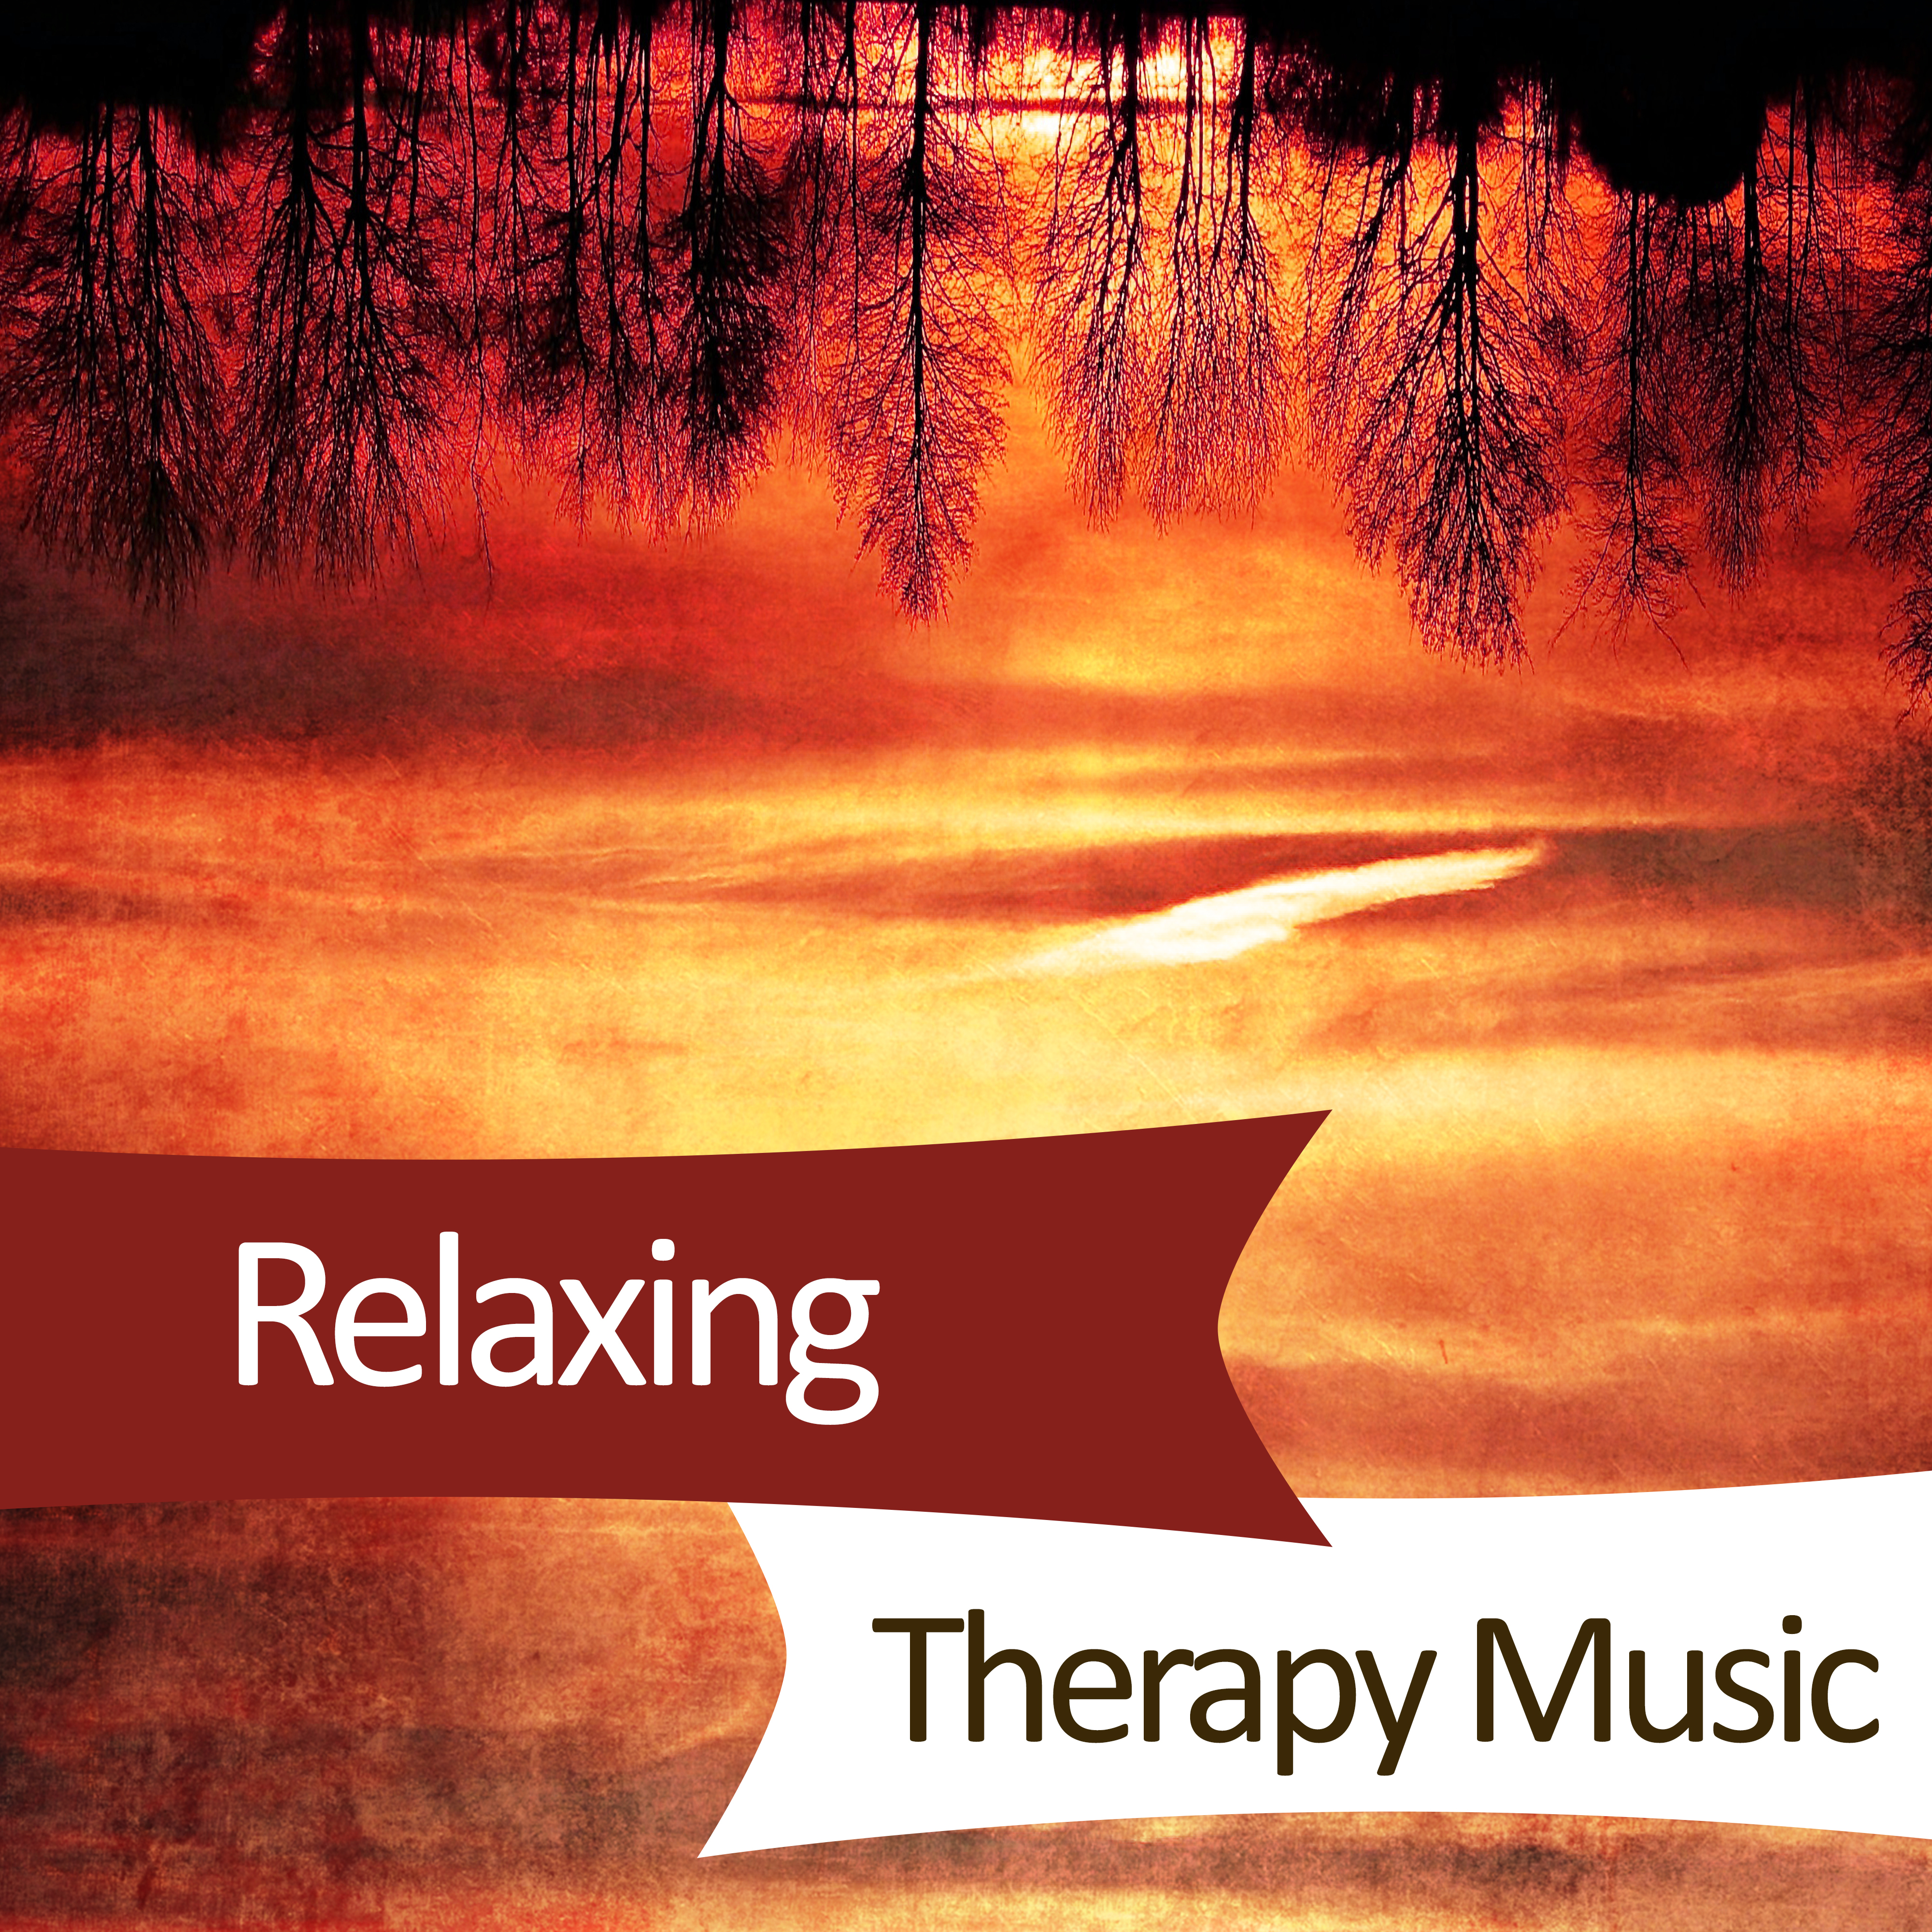 Relaxing Therapy Music – Sounds for Relaxation, Stress Free, Peaceful Music, Pure Rest, Calm Mind, New Age Music